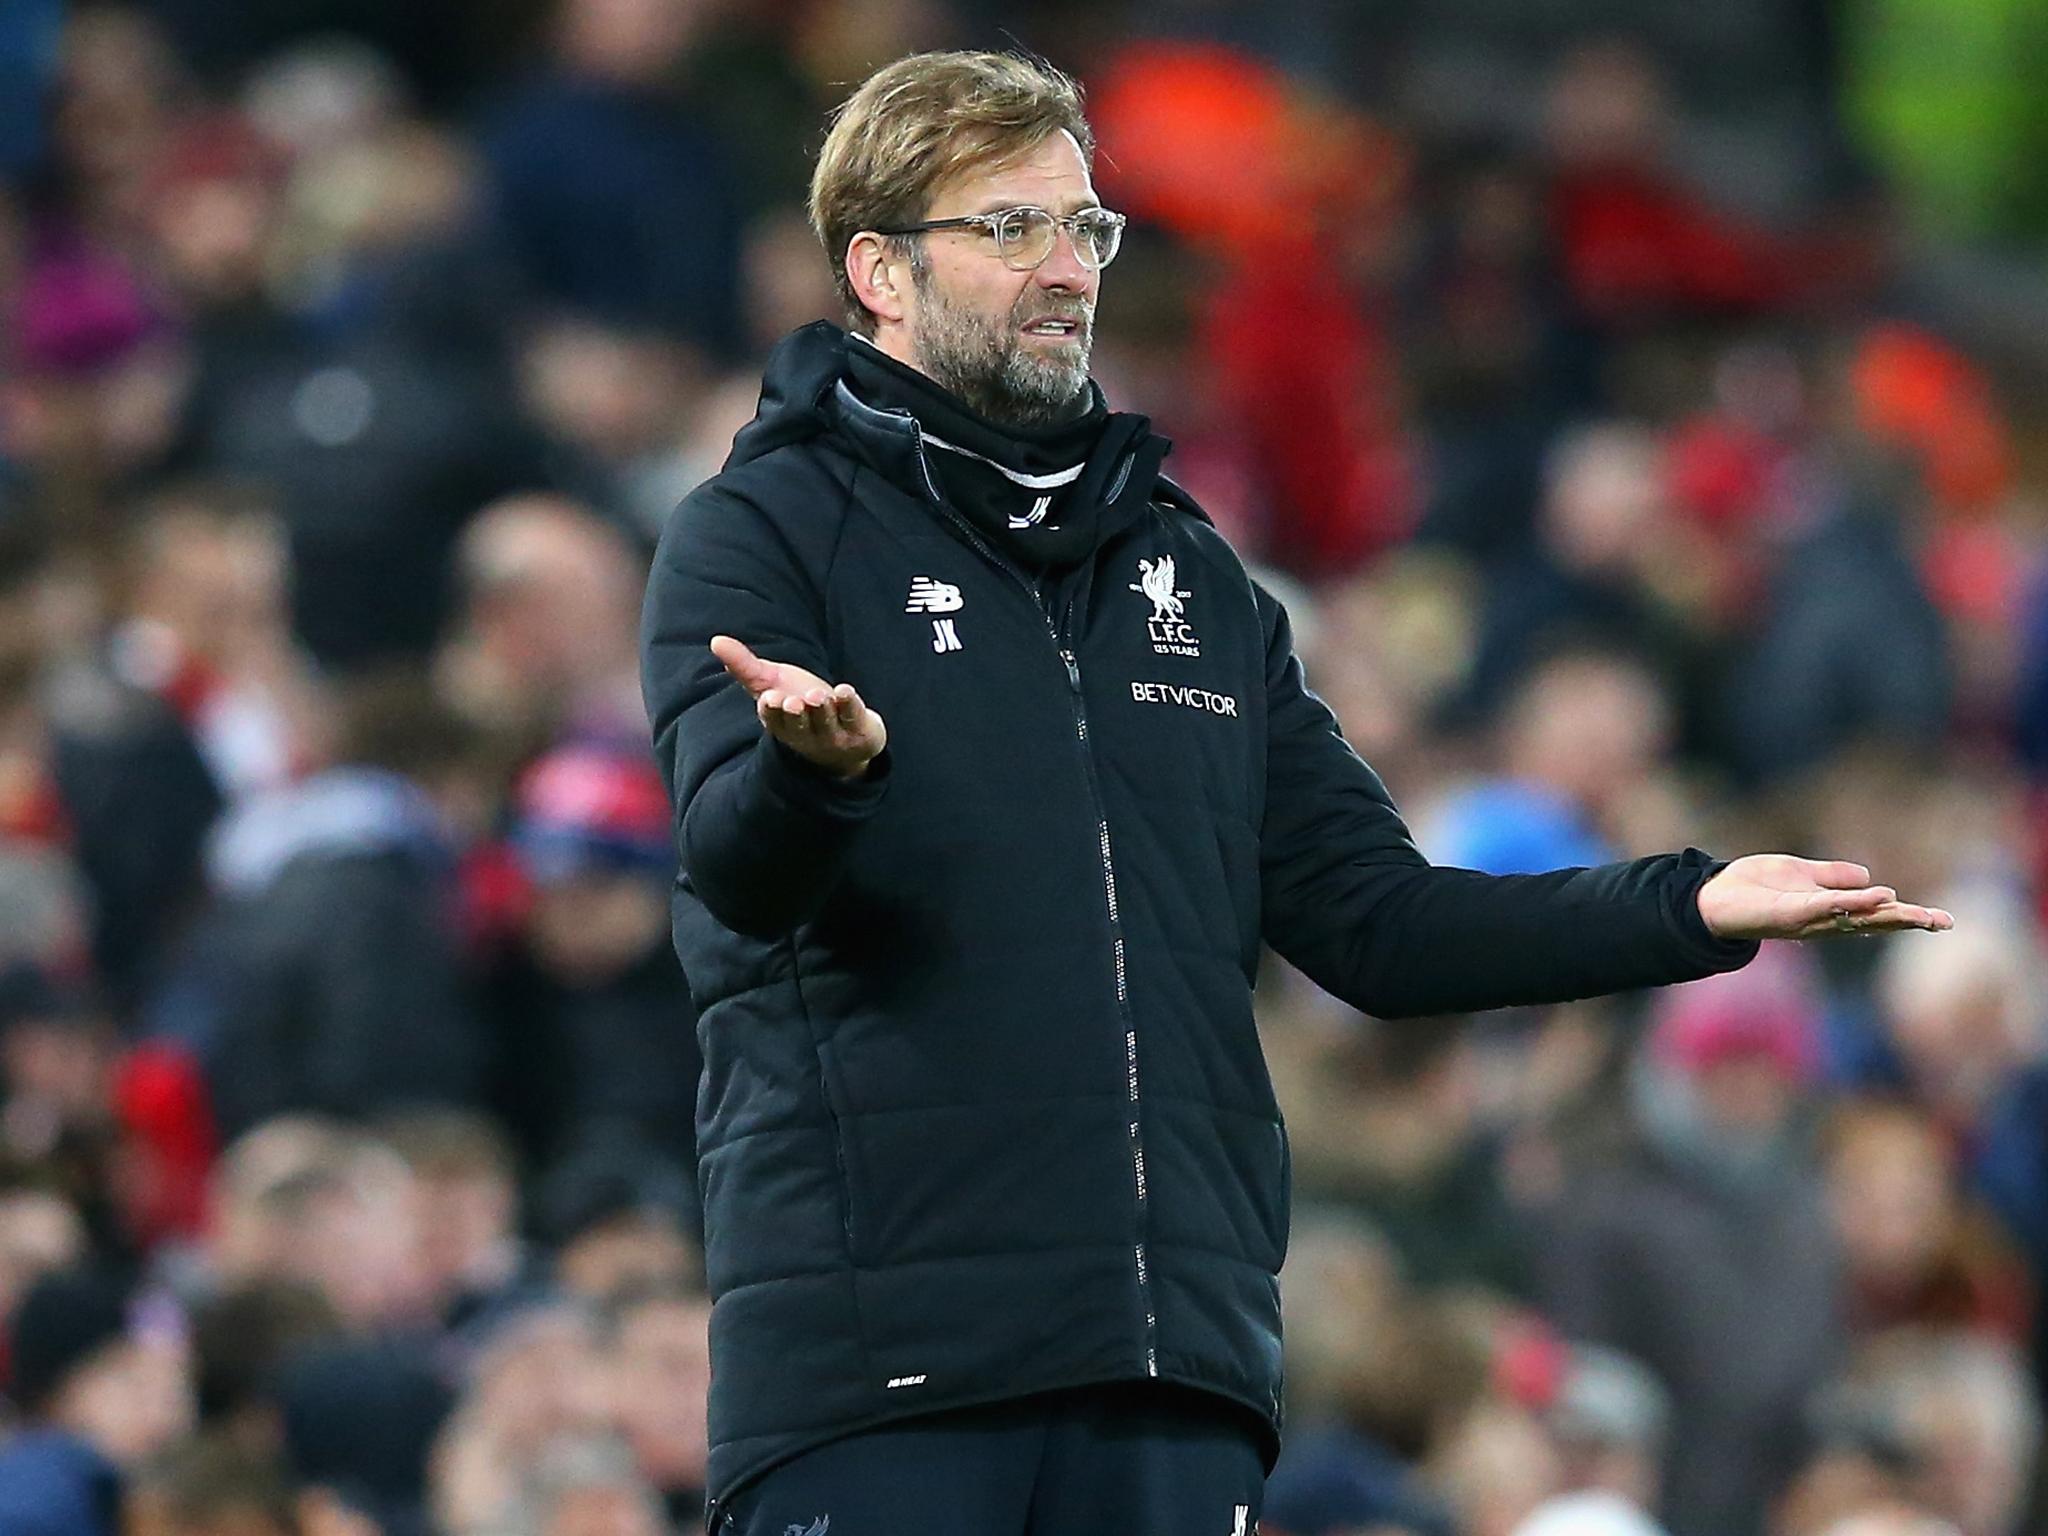 Jürgen Klopp accused BT Sport of reducing time added on during Liverpool's 3-2 defeat by West Brom